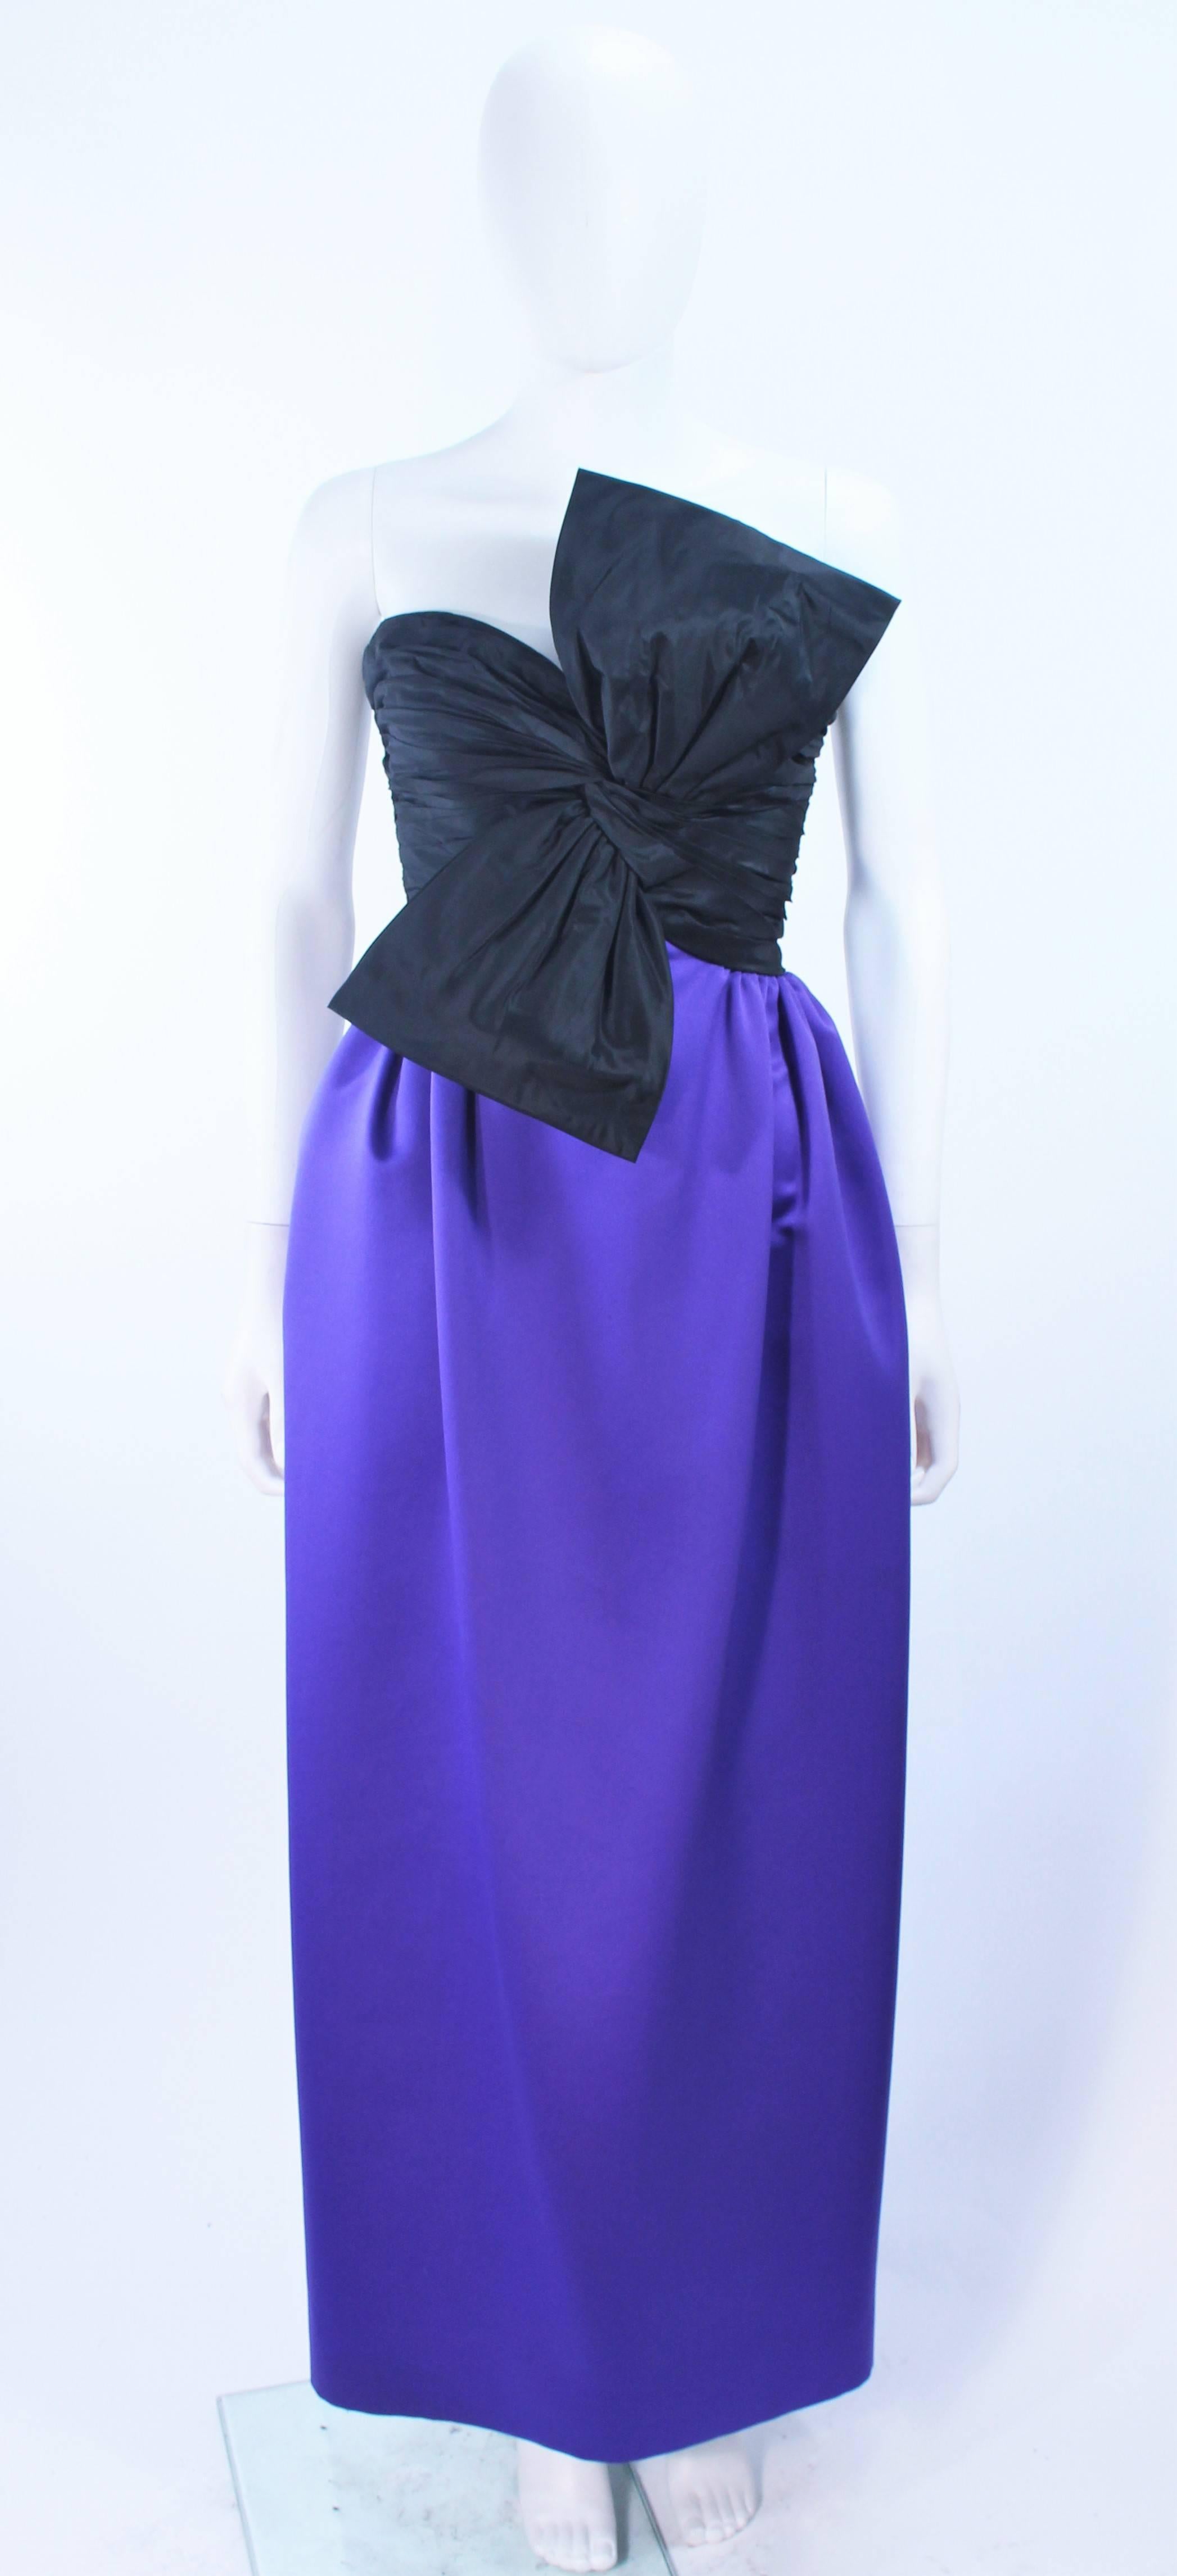 This Jill Richards gown is composed of a satin in black and purple. Features a front draped bow with a draped style skirt. There is a center back zipper closure. In excellent vintage condition. 

**Please cross-reference measurements for personal